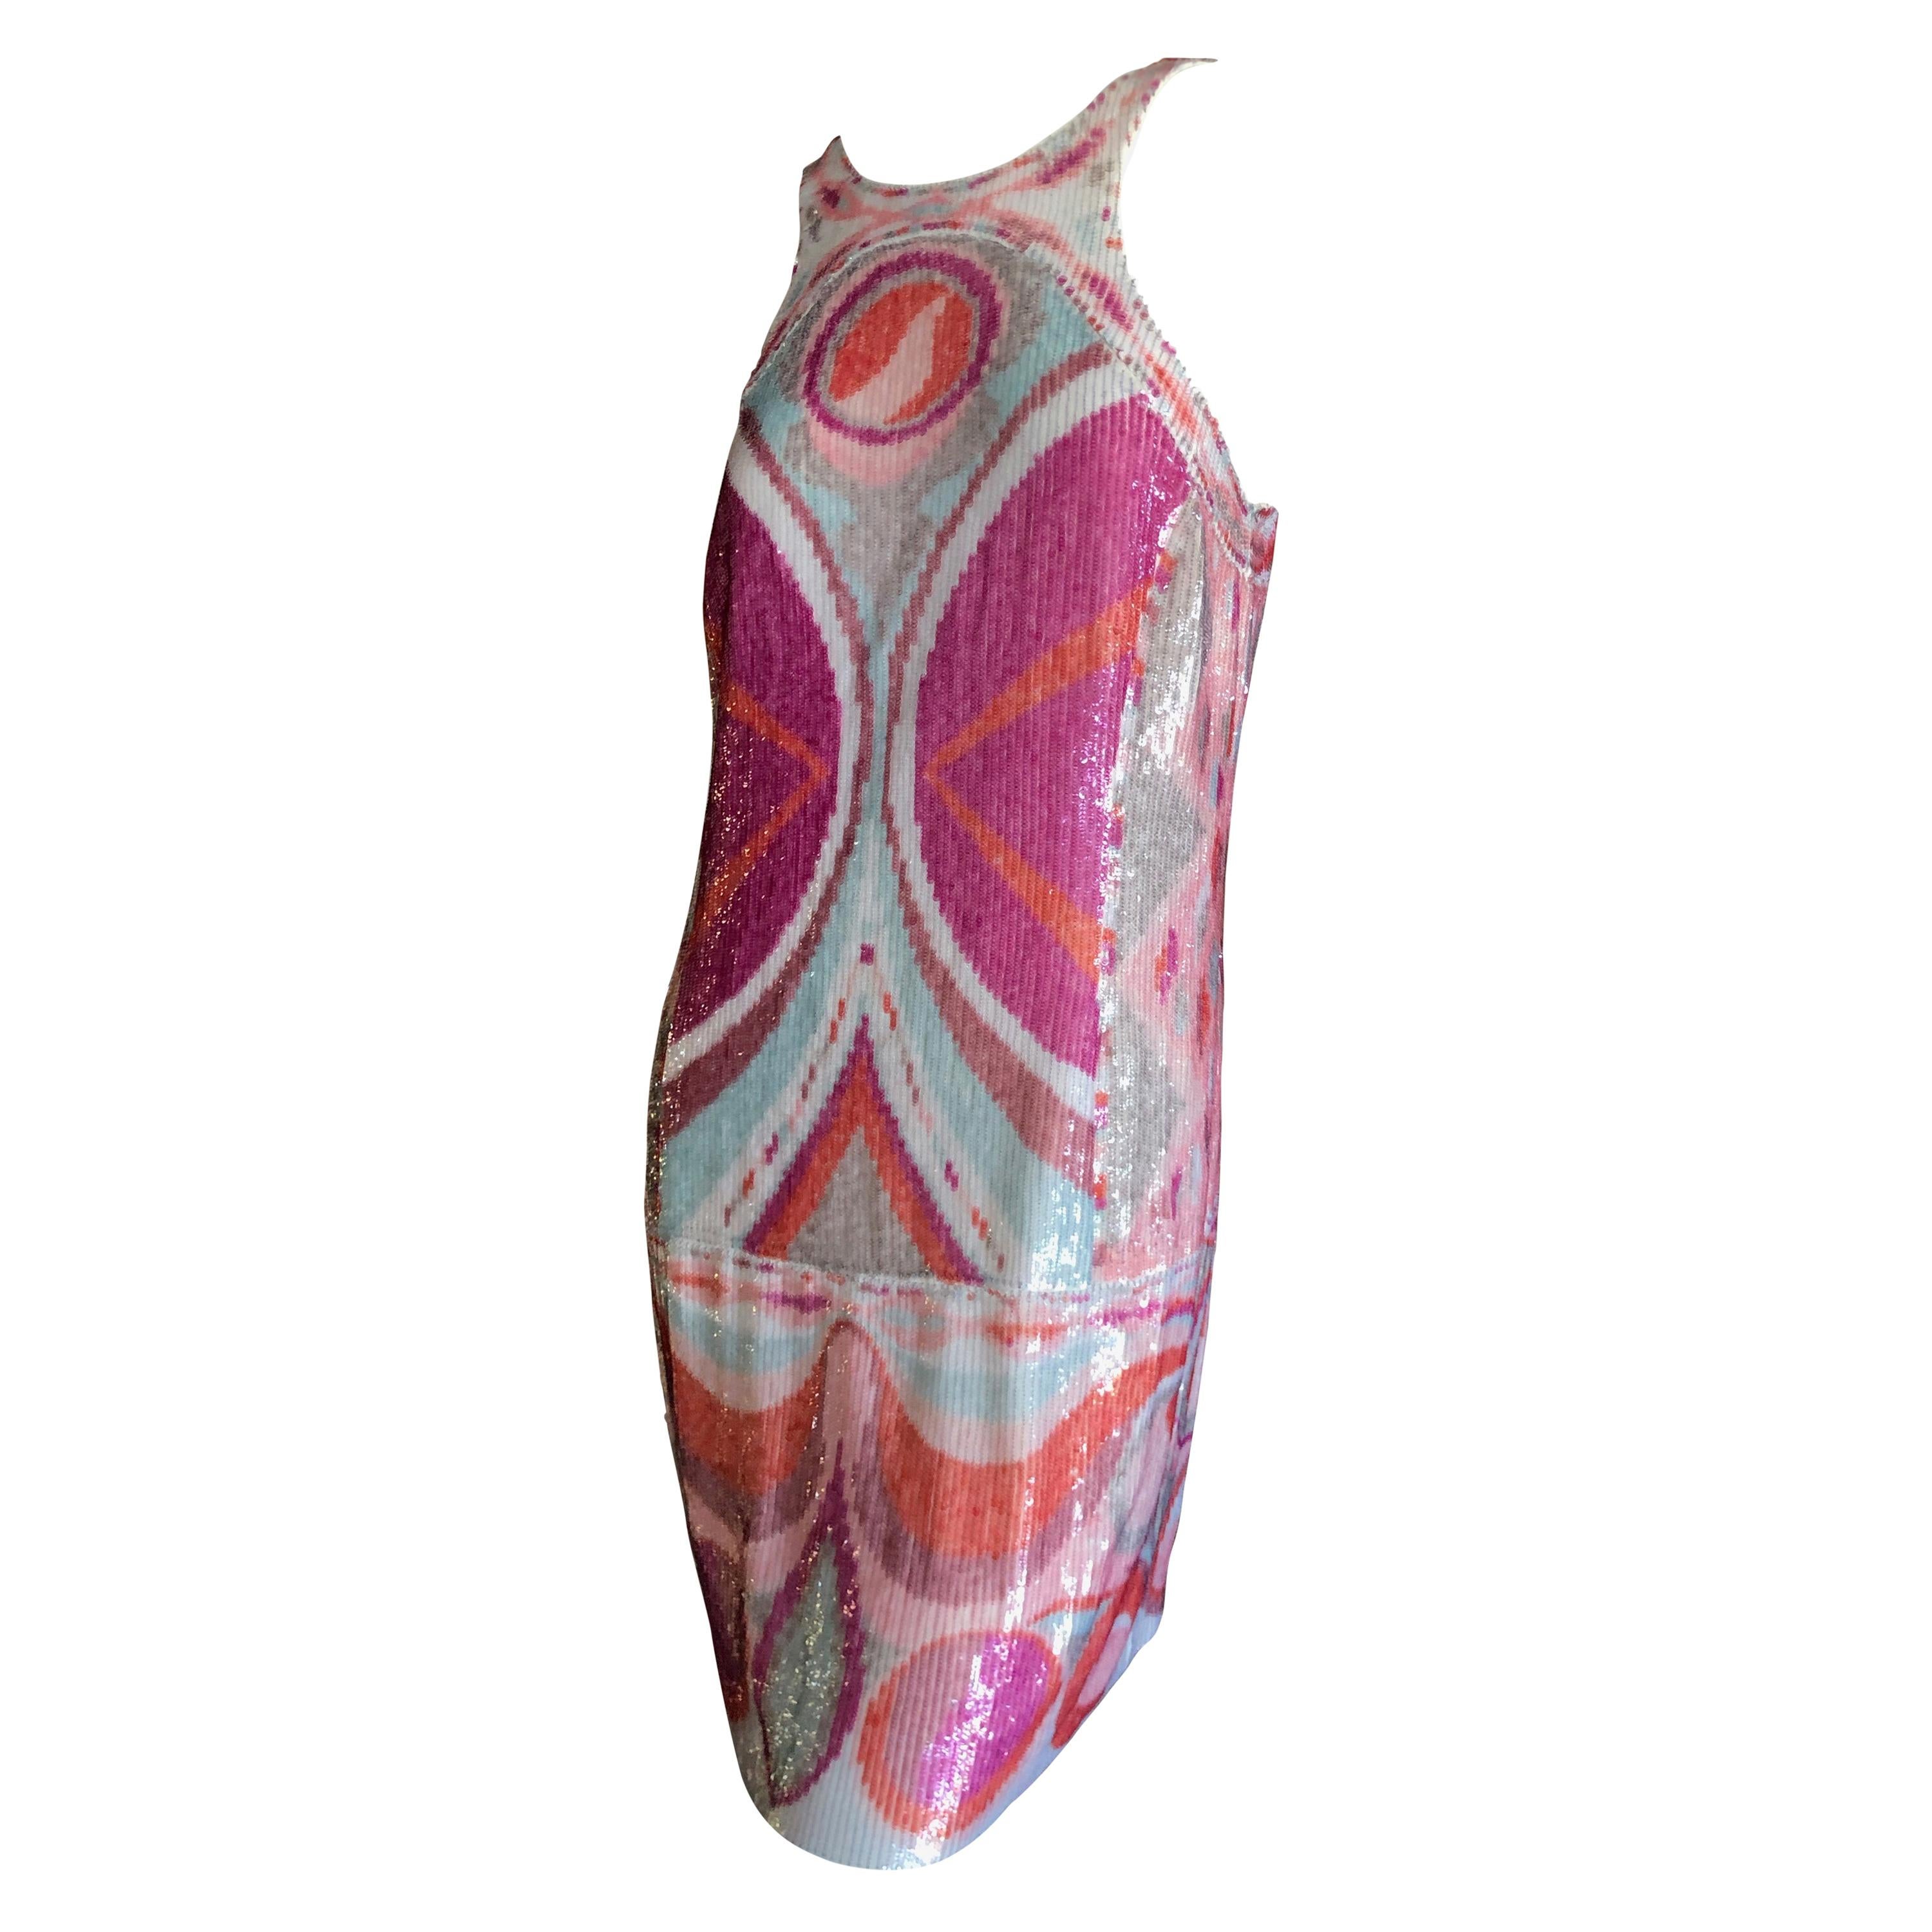 Emilio Pucci Mod 60's Style Sleeveless Silk Dress with Sequin Embellishments